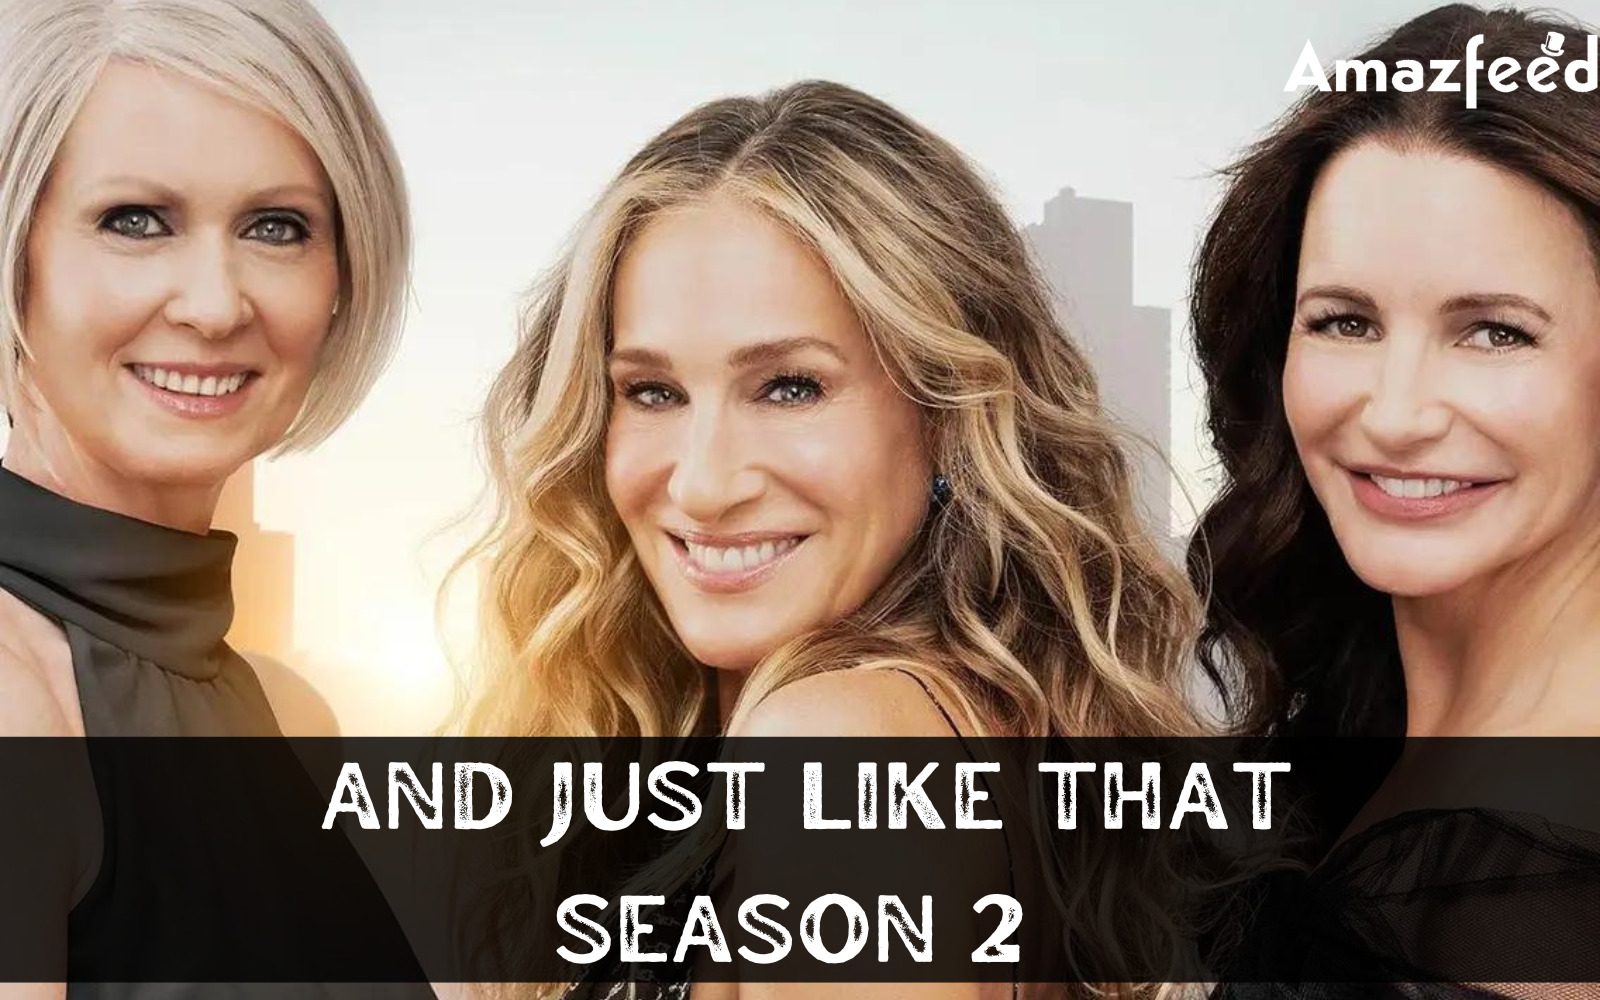 Is And Just Like That Season 2 Renewed Or Cancelled